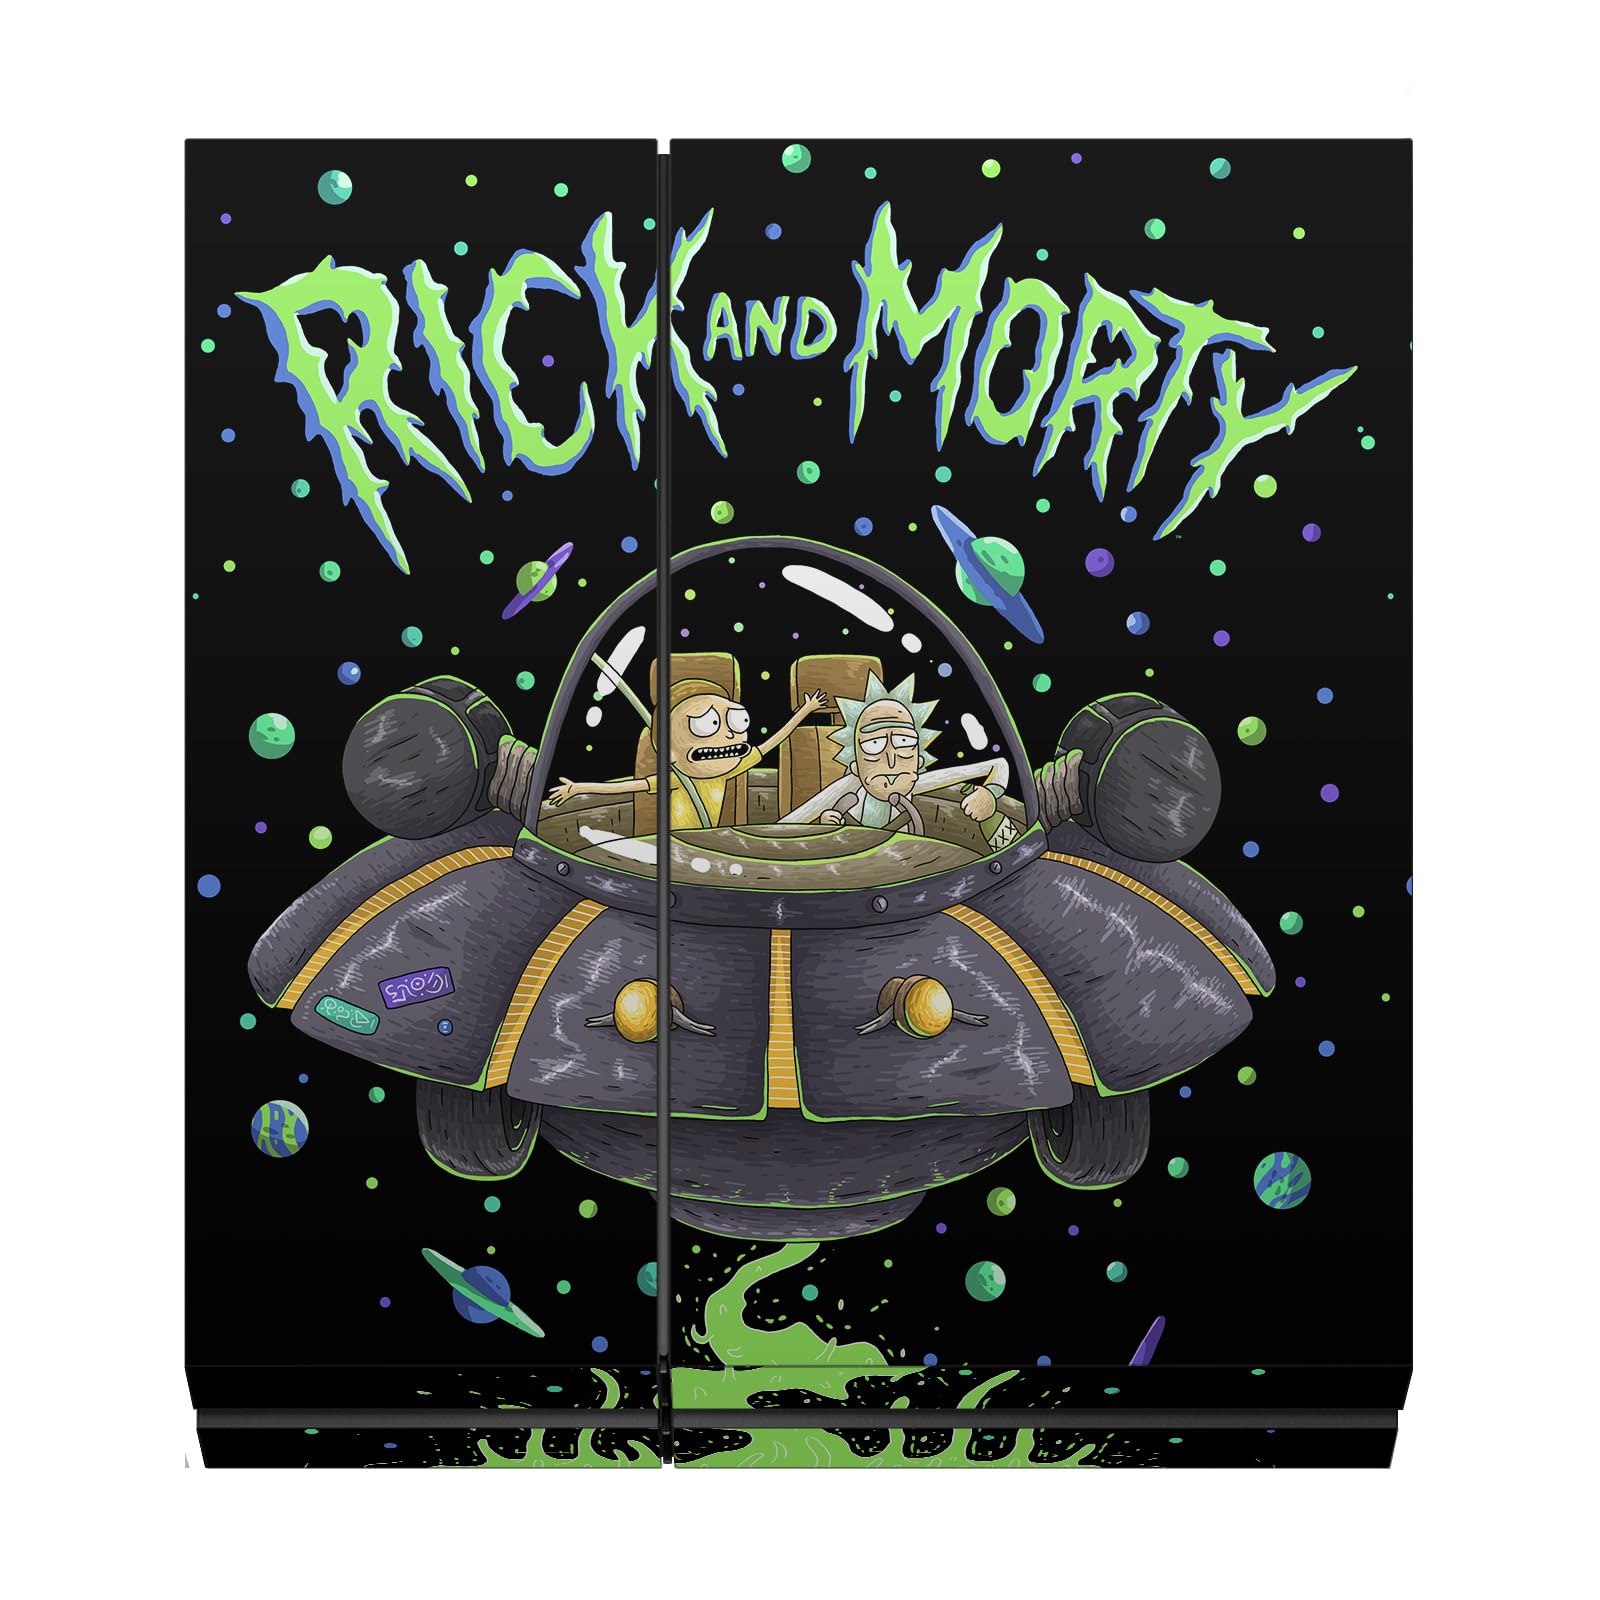 Head Case Designs Officially Licensed Rick and Morty The Space Cruiser Graphics Vinyl Sticker Gaming Skin Decal Cover Compatible with Sony Playstation 4 PS4 Console and DualShock 4 Controller Bundle